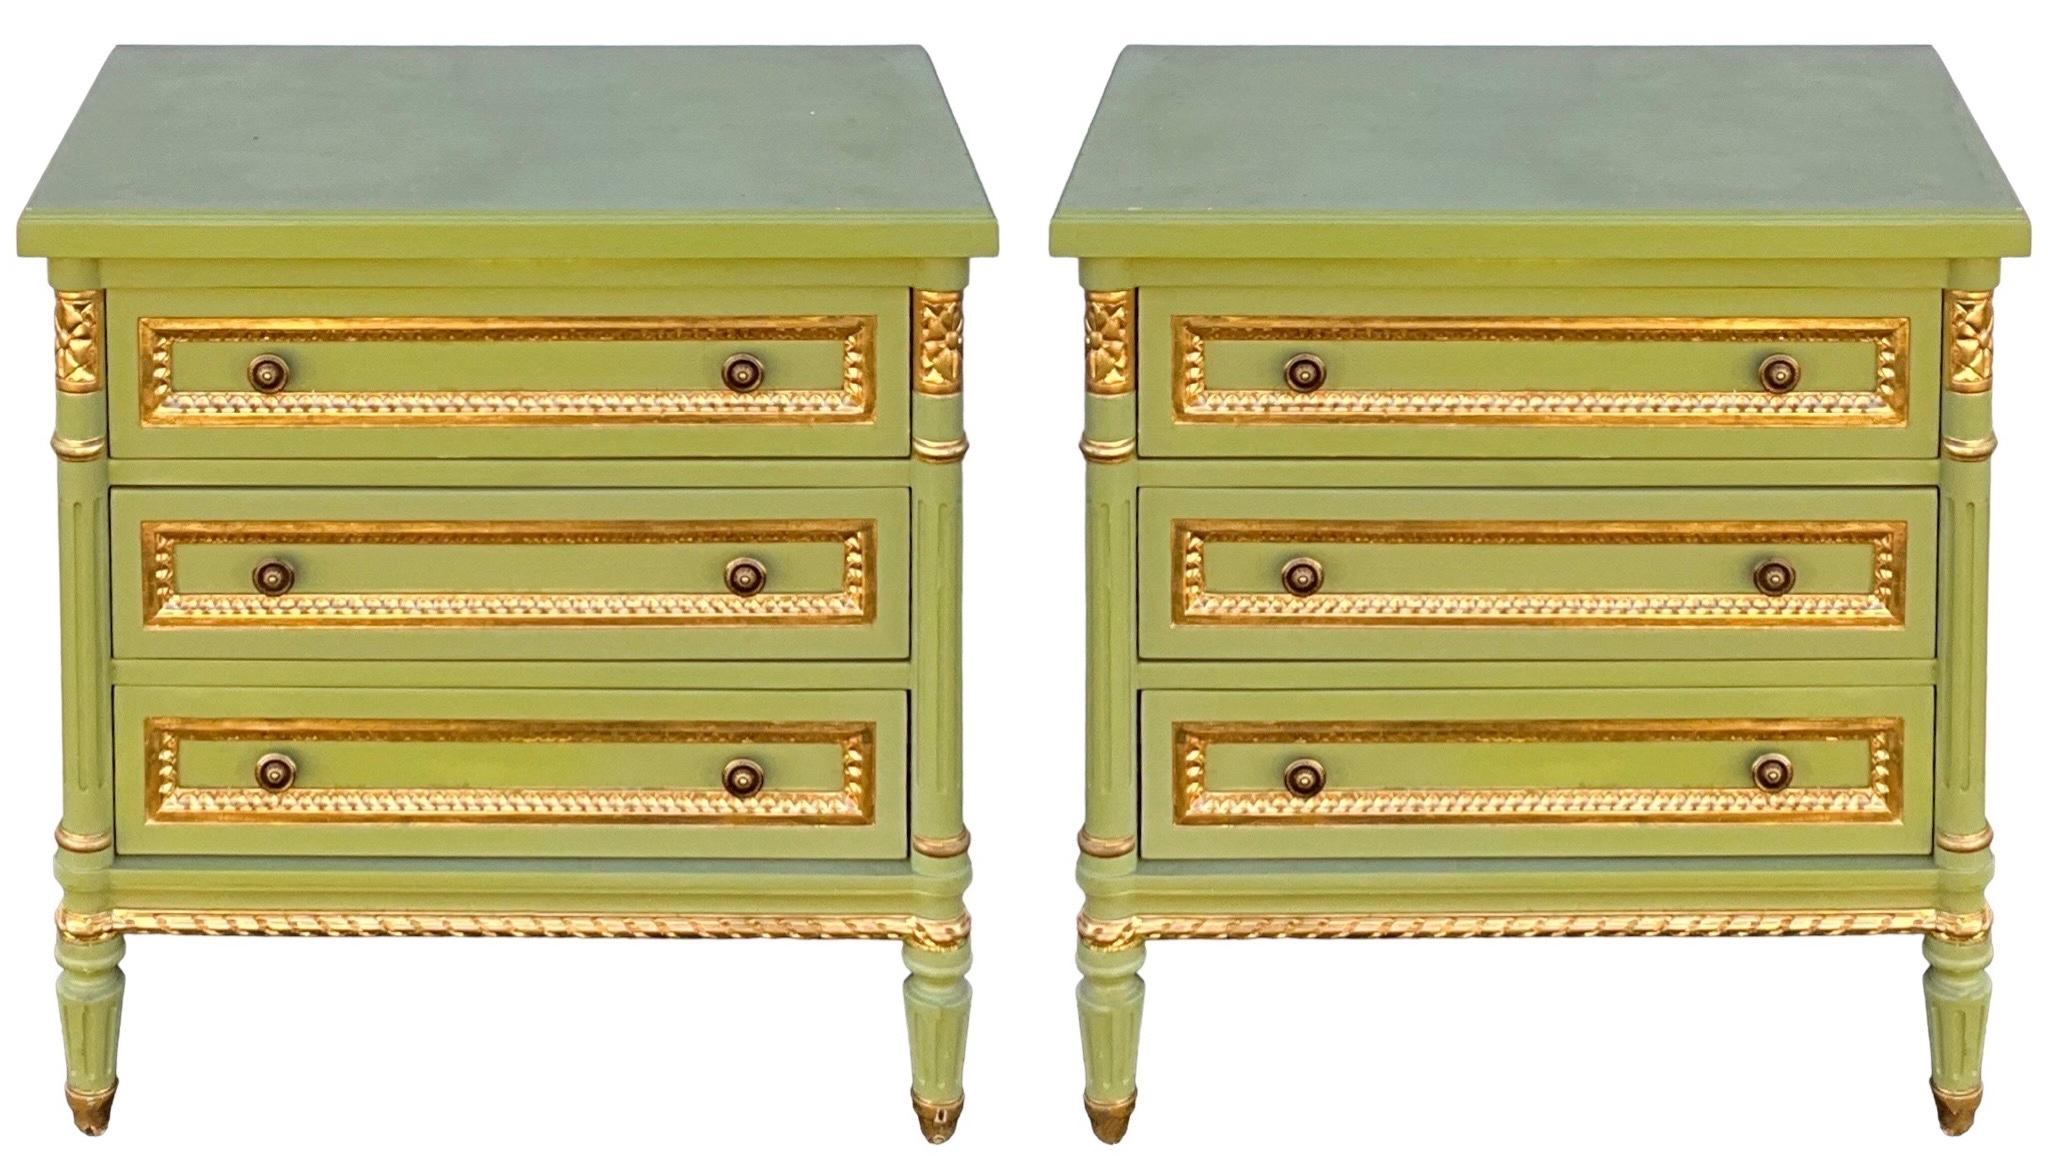 French Louis XVI Style Painted Chests / Commodes / Tables Att. To Julia Gray In Good Condition For Sale In Kennesaw, GA